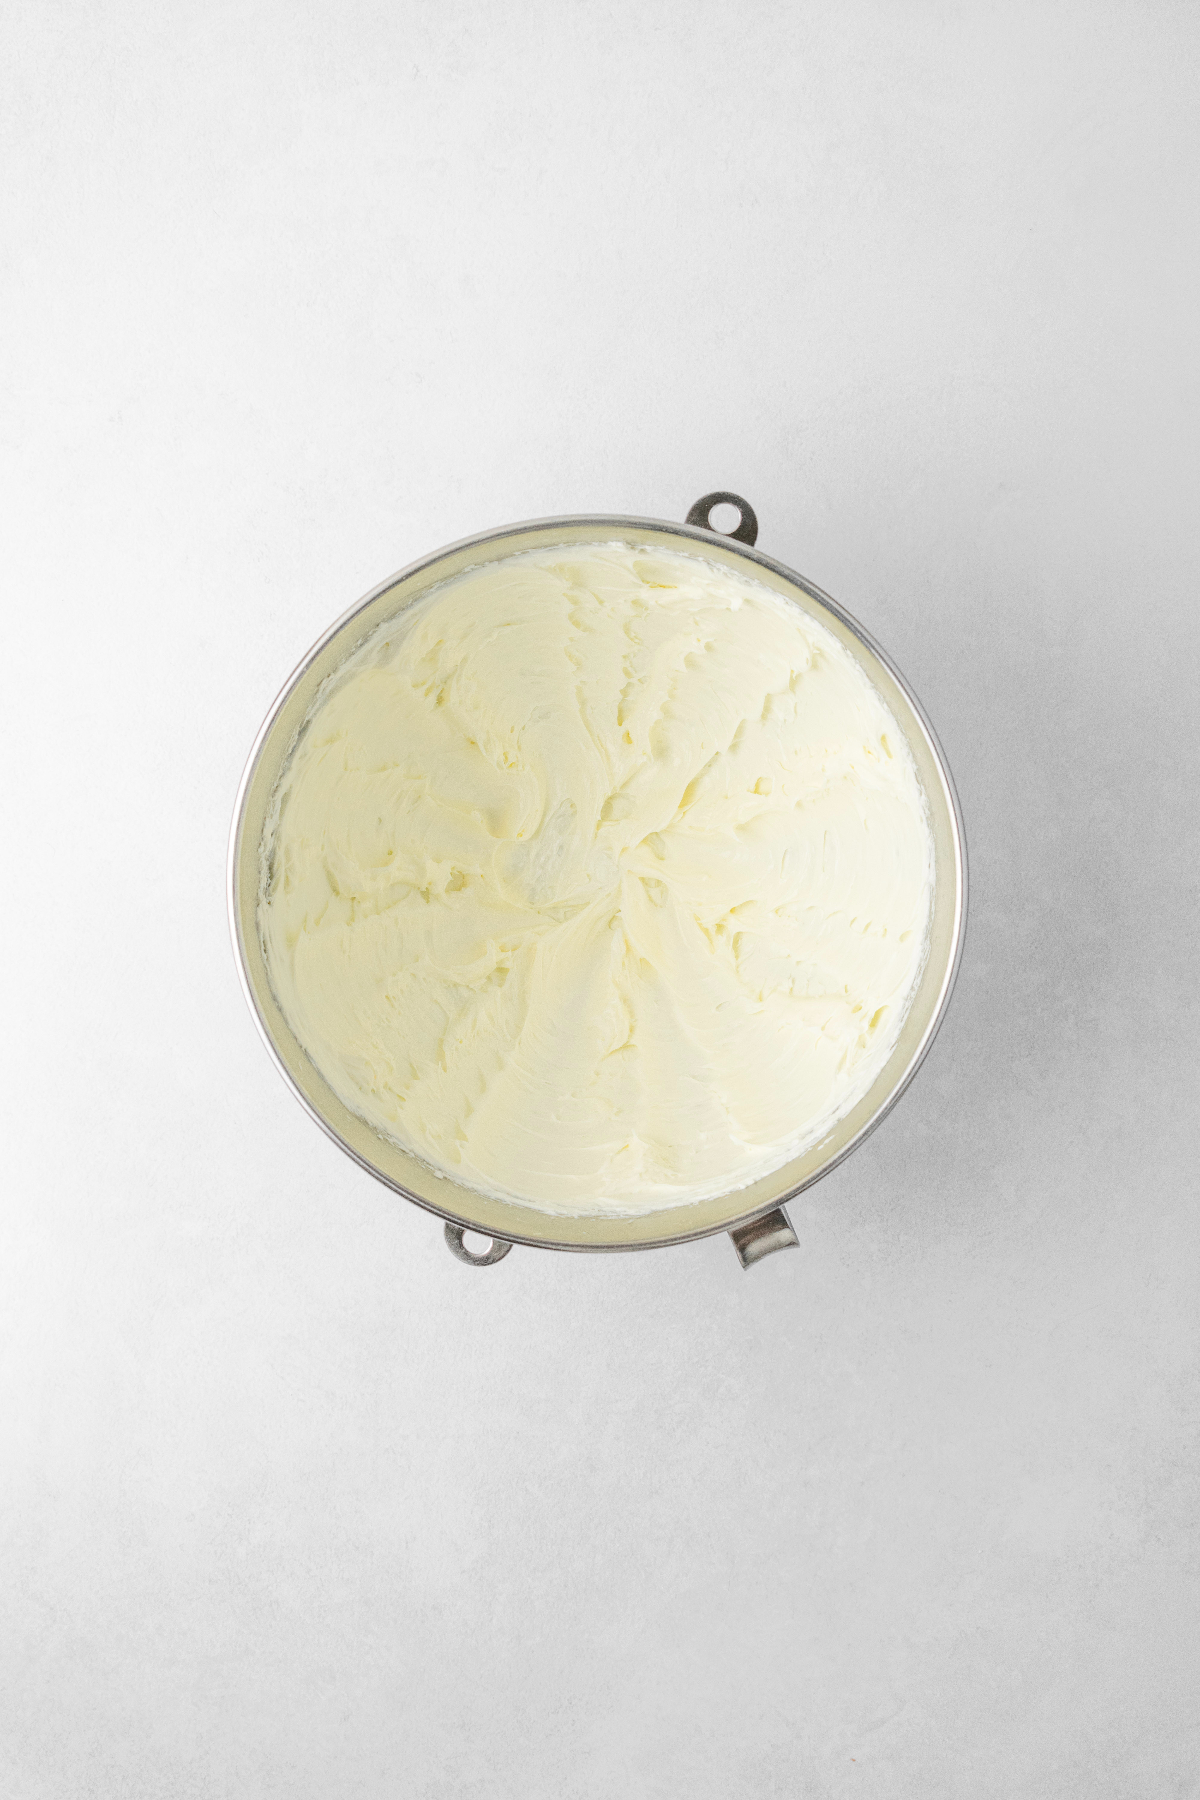 Creamed cream cheese in a stainless steel bowl.